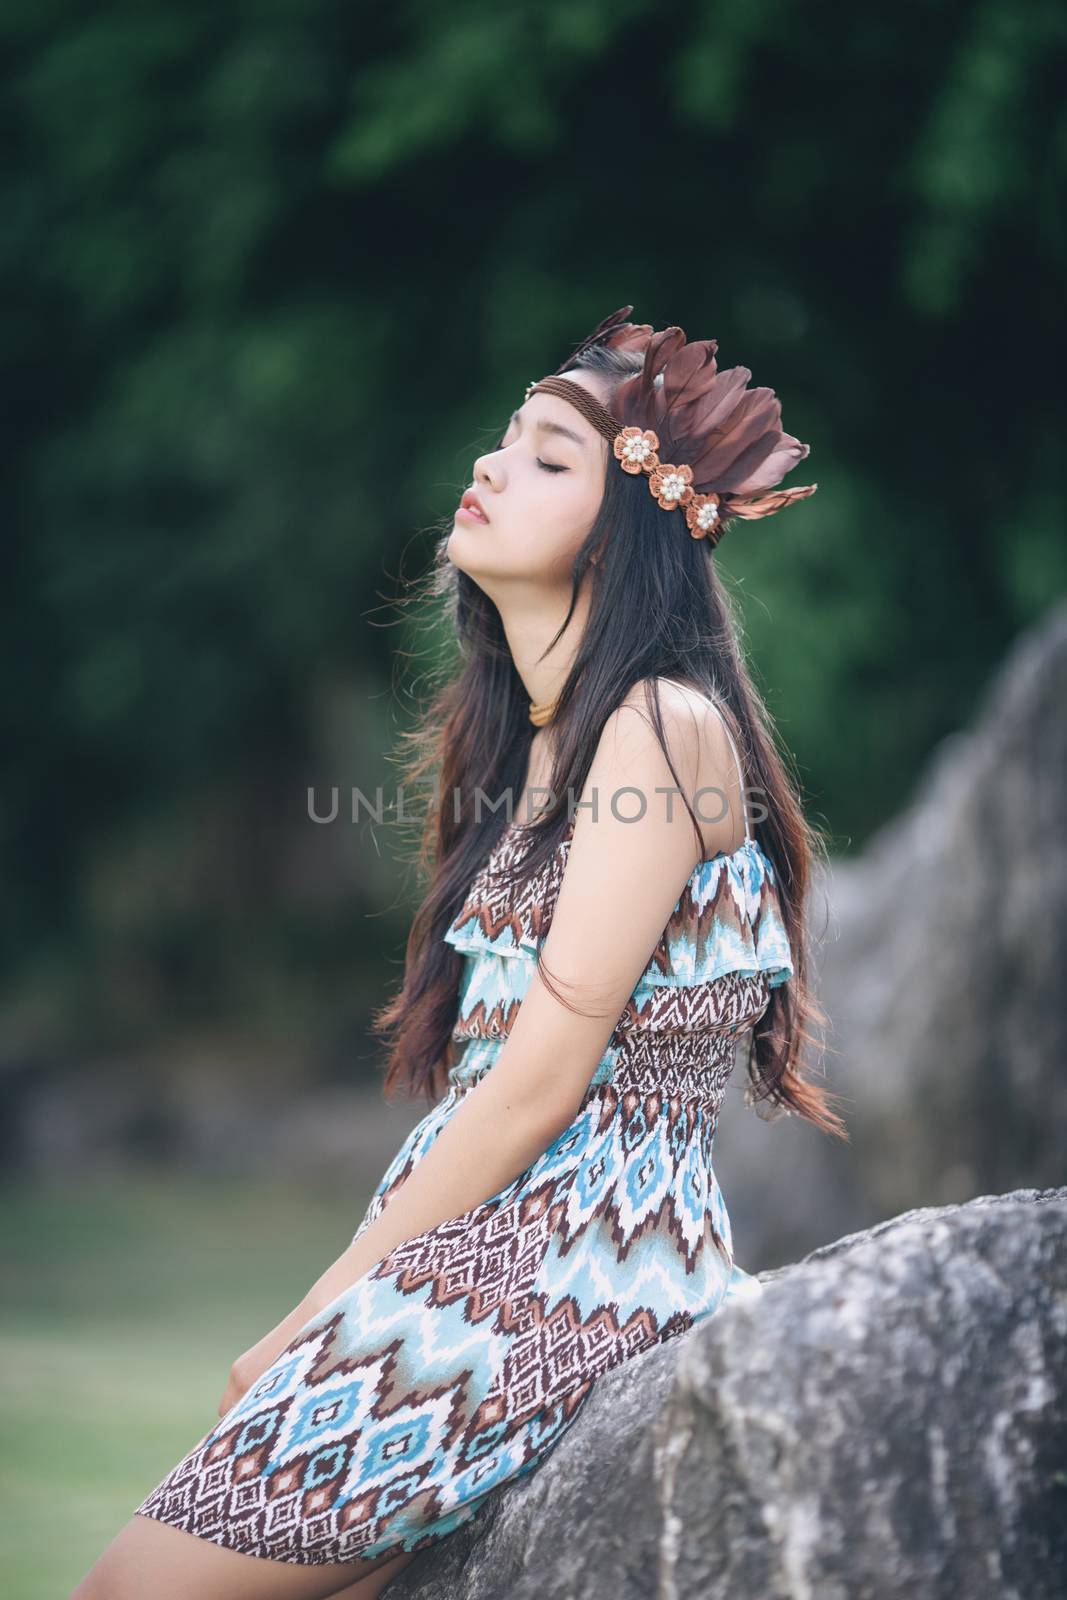 Mini beautiful portrait native american concept by nopparats